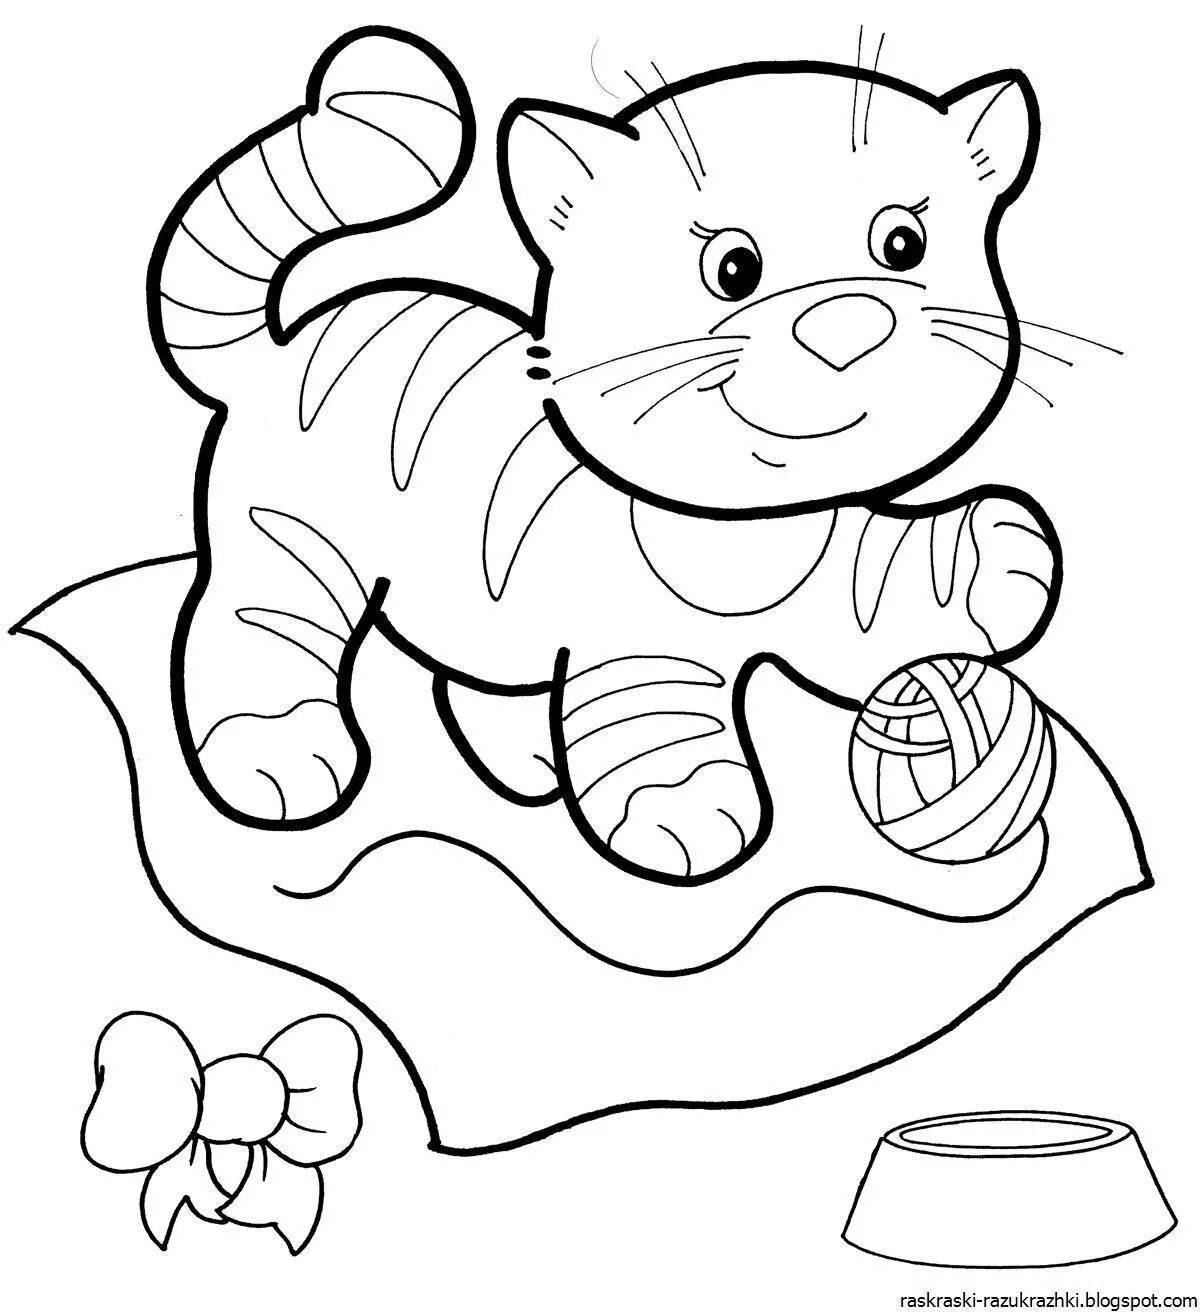 Coloring playtime kitten for children 3-4 years old